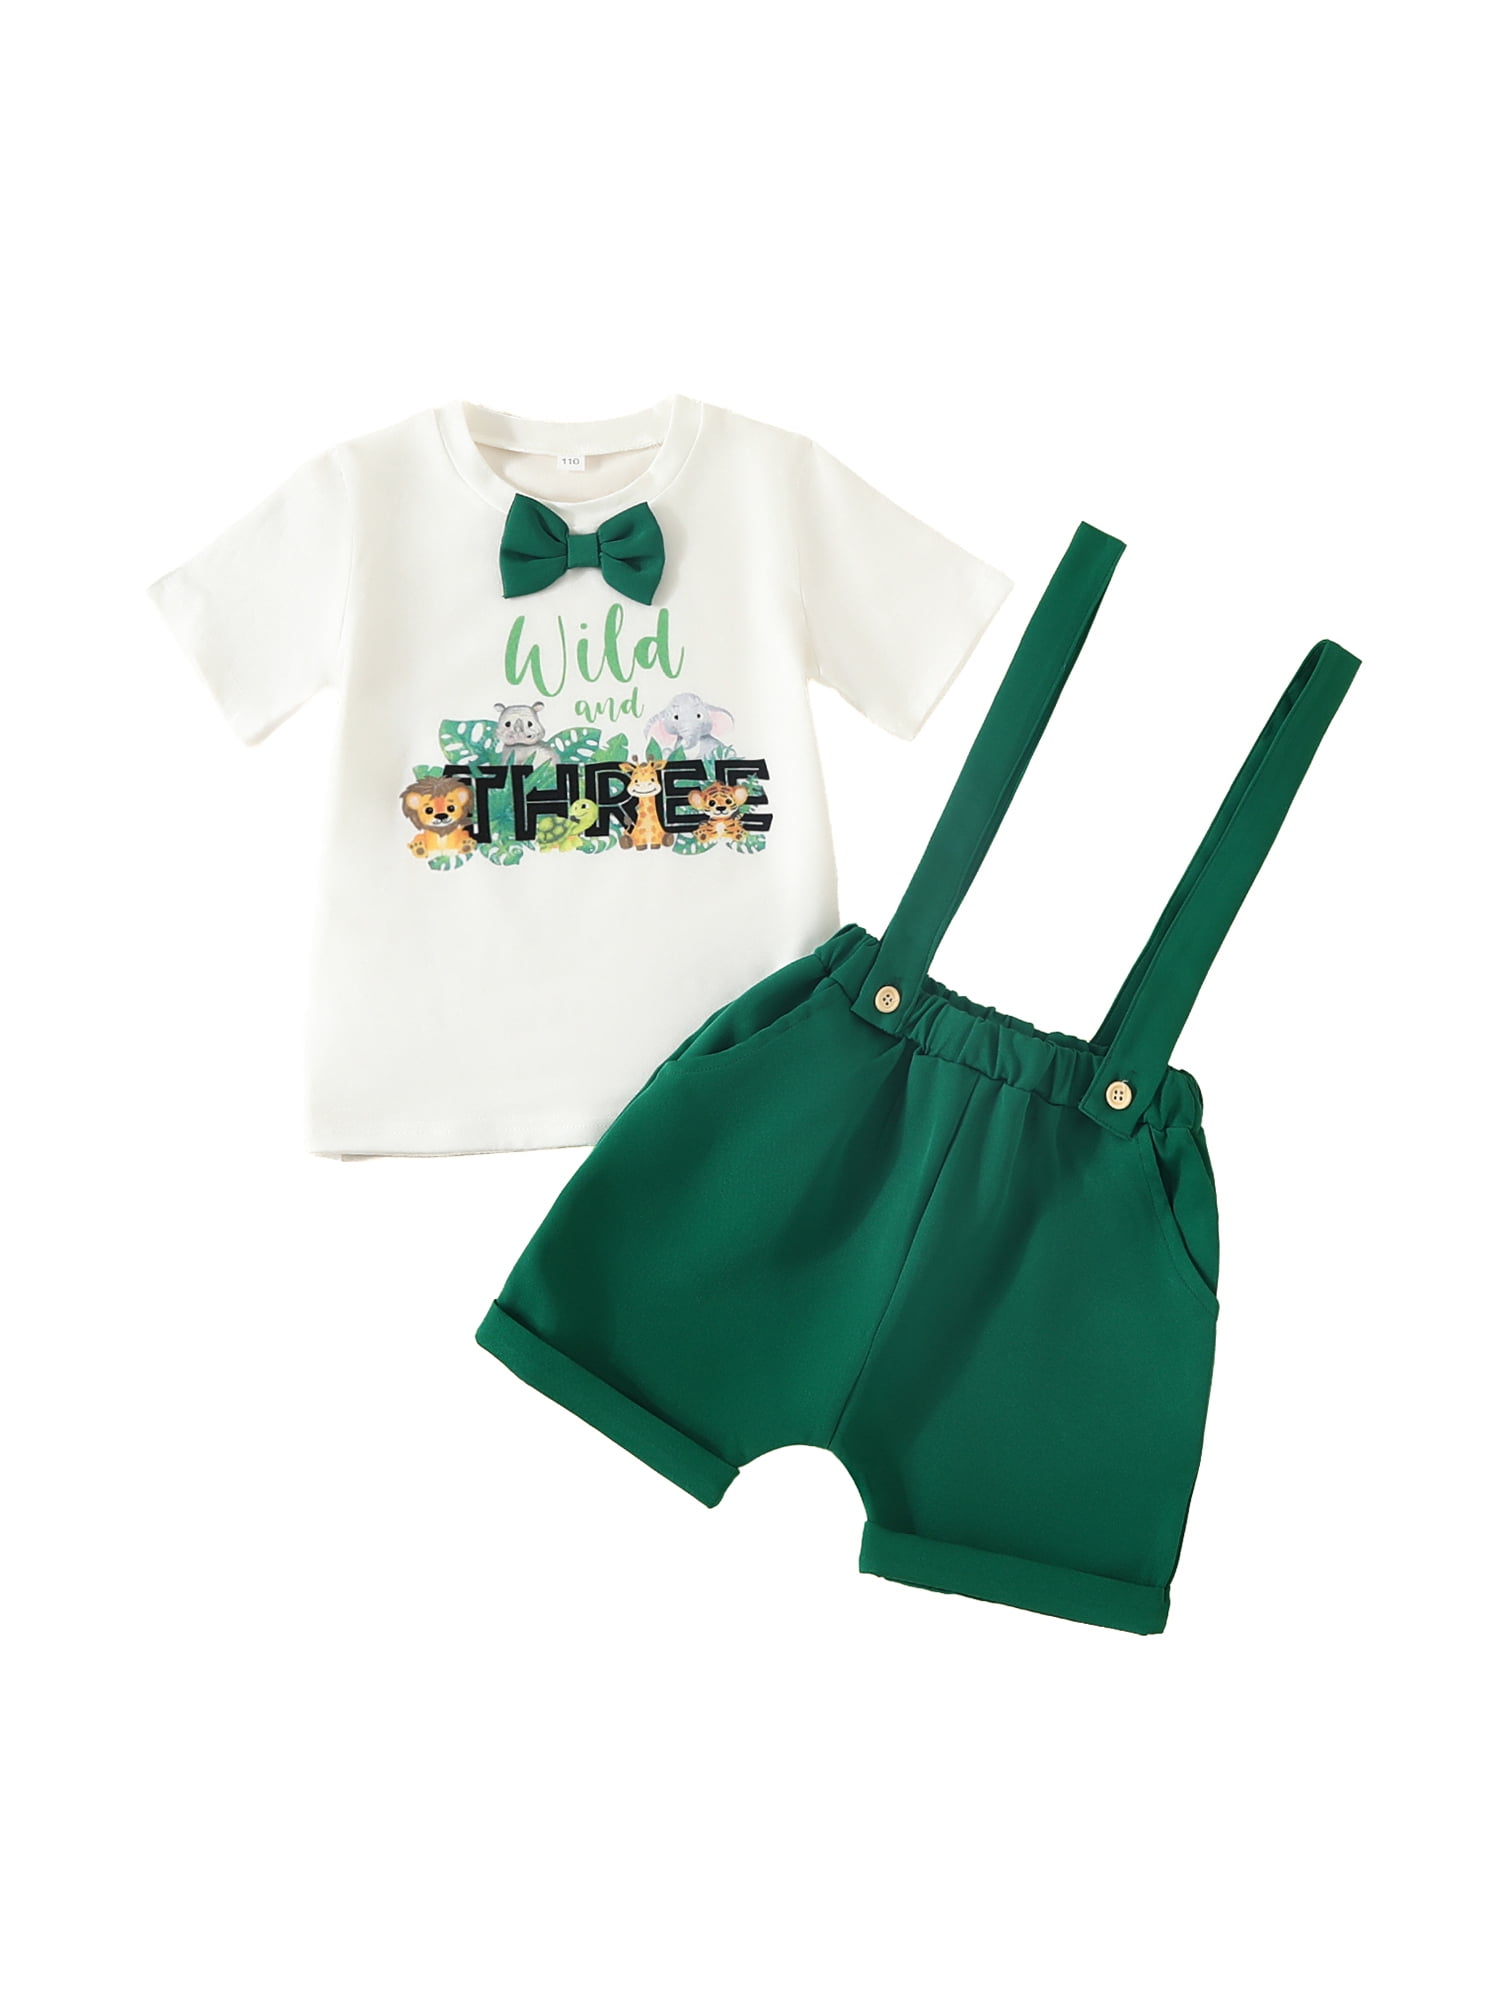 The Big One Birthday Outfit Baby Boys Bowtie Romper Suspenders